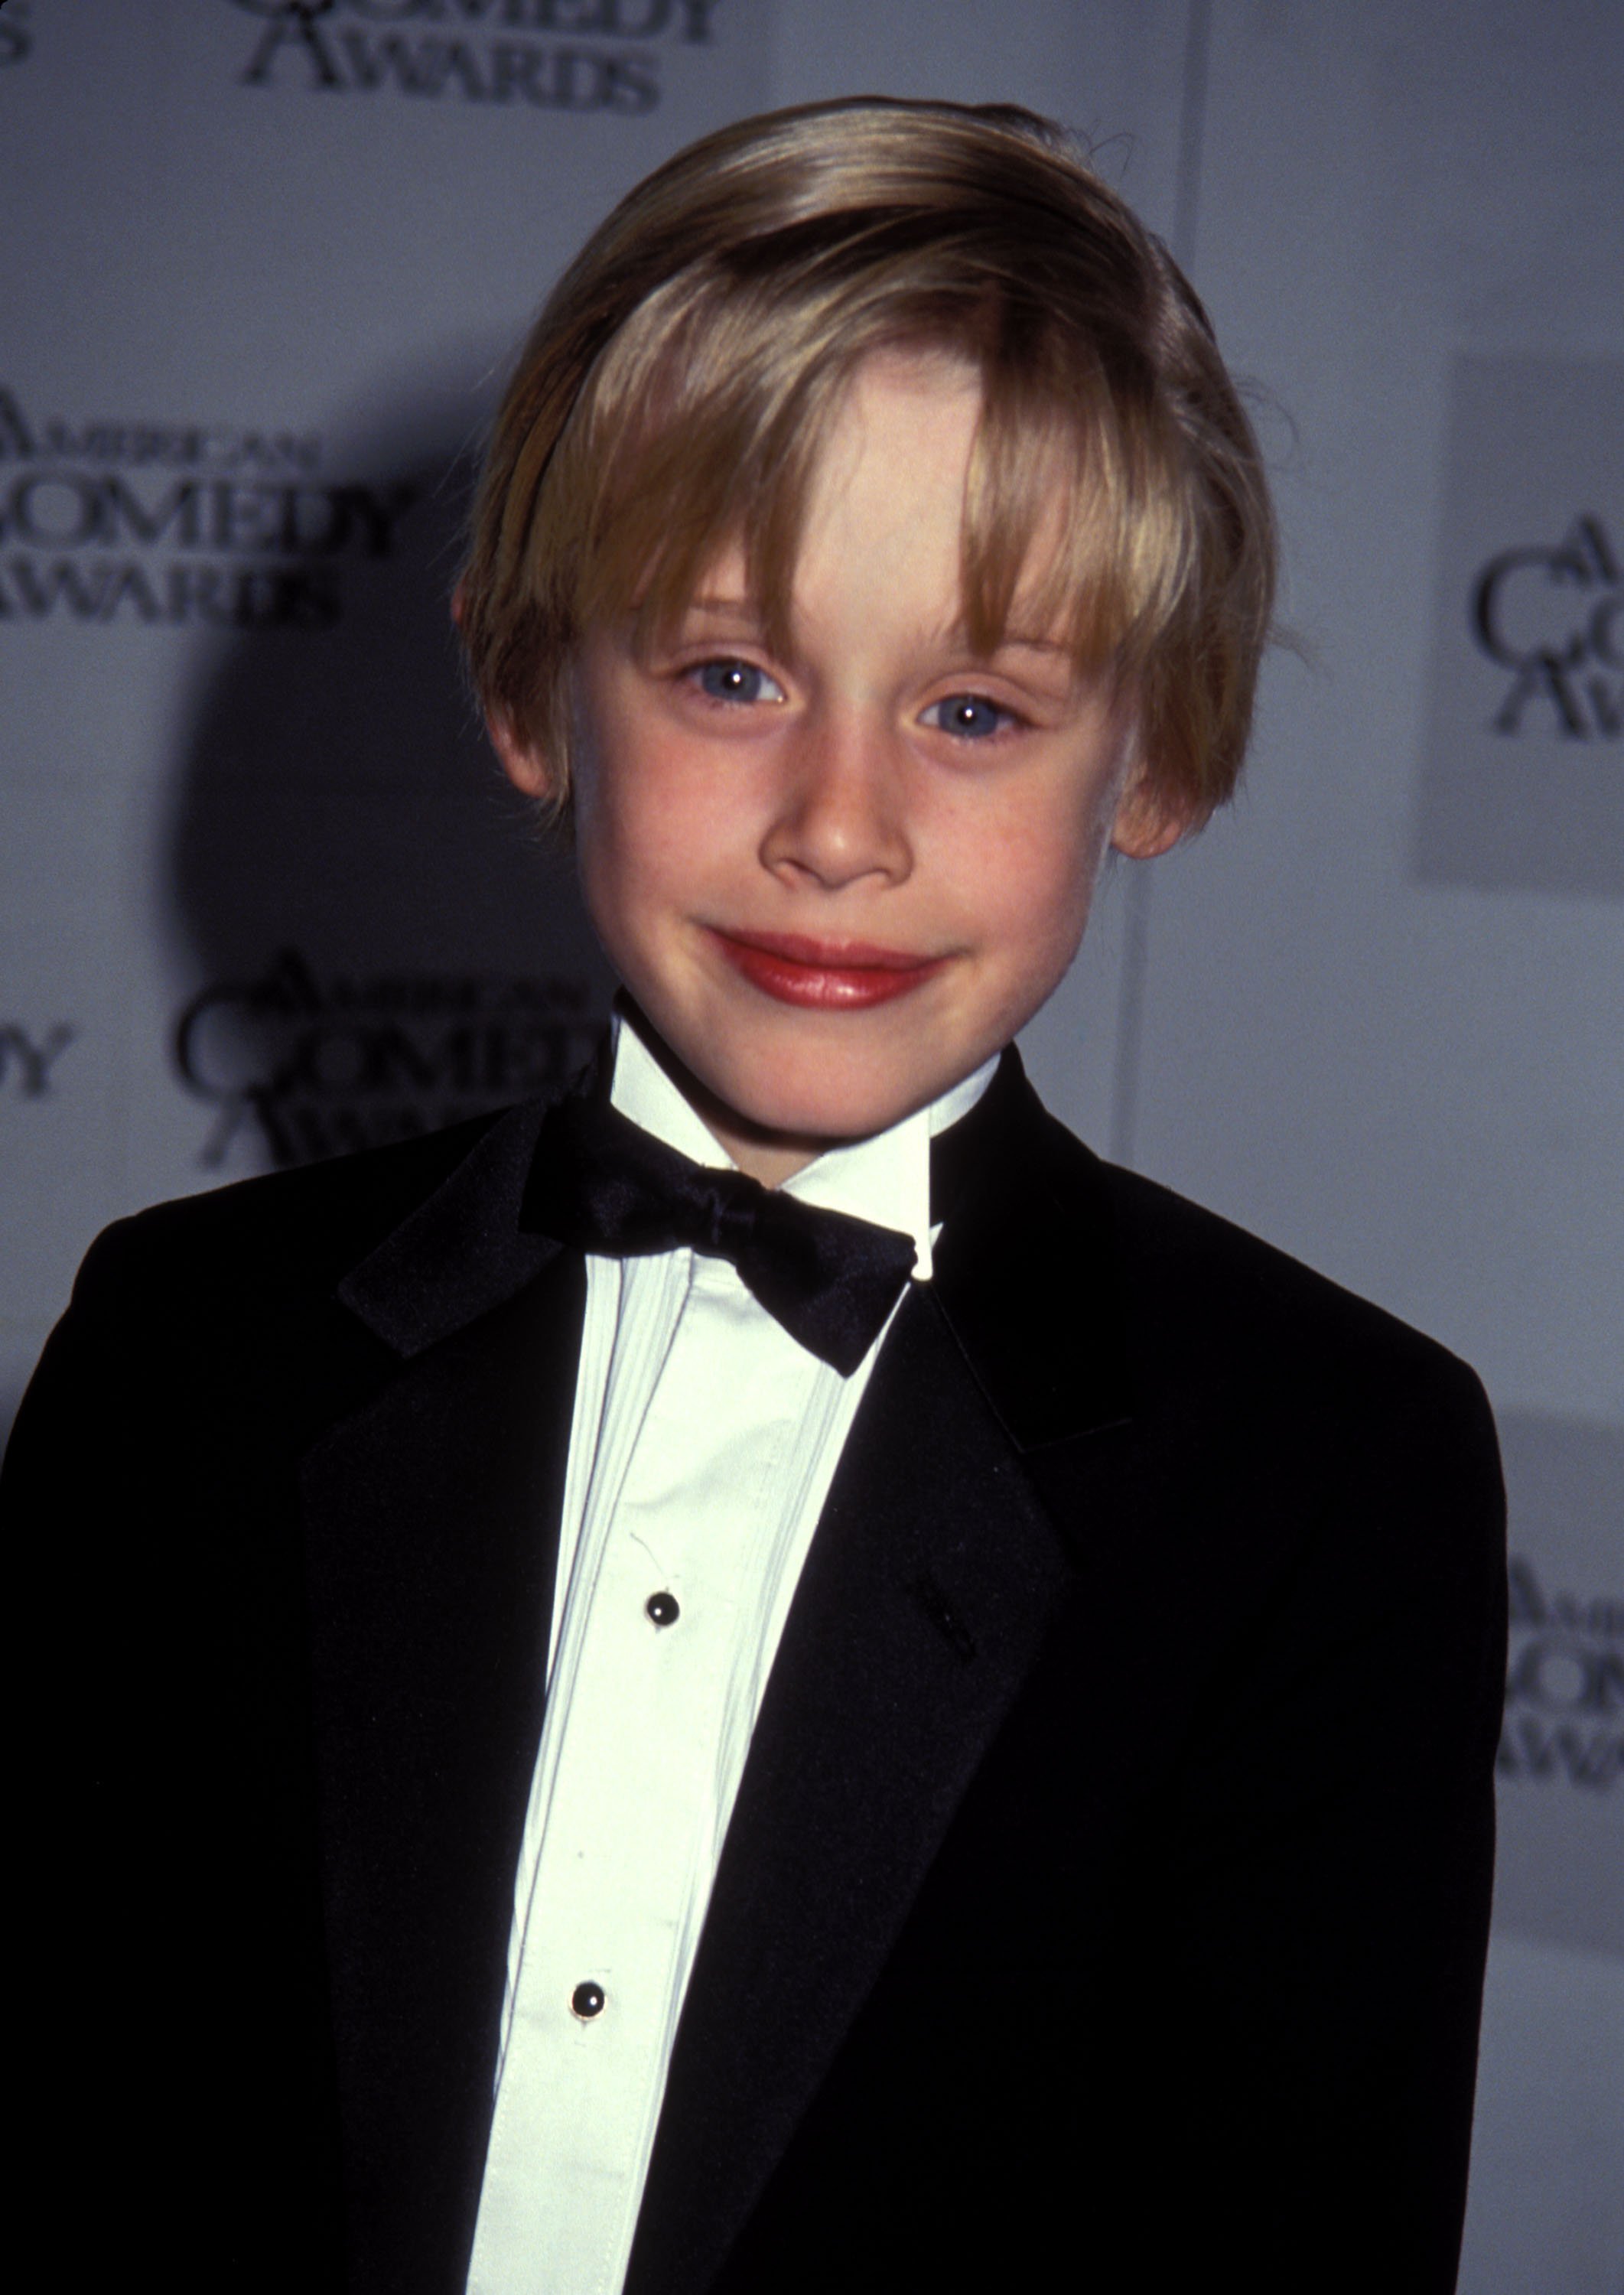 Macaulay Culkin at the Shrine Auditorium in Los Angeles, California | Source: Getty Images